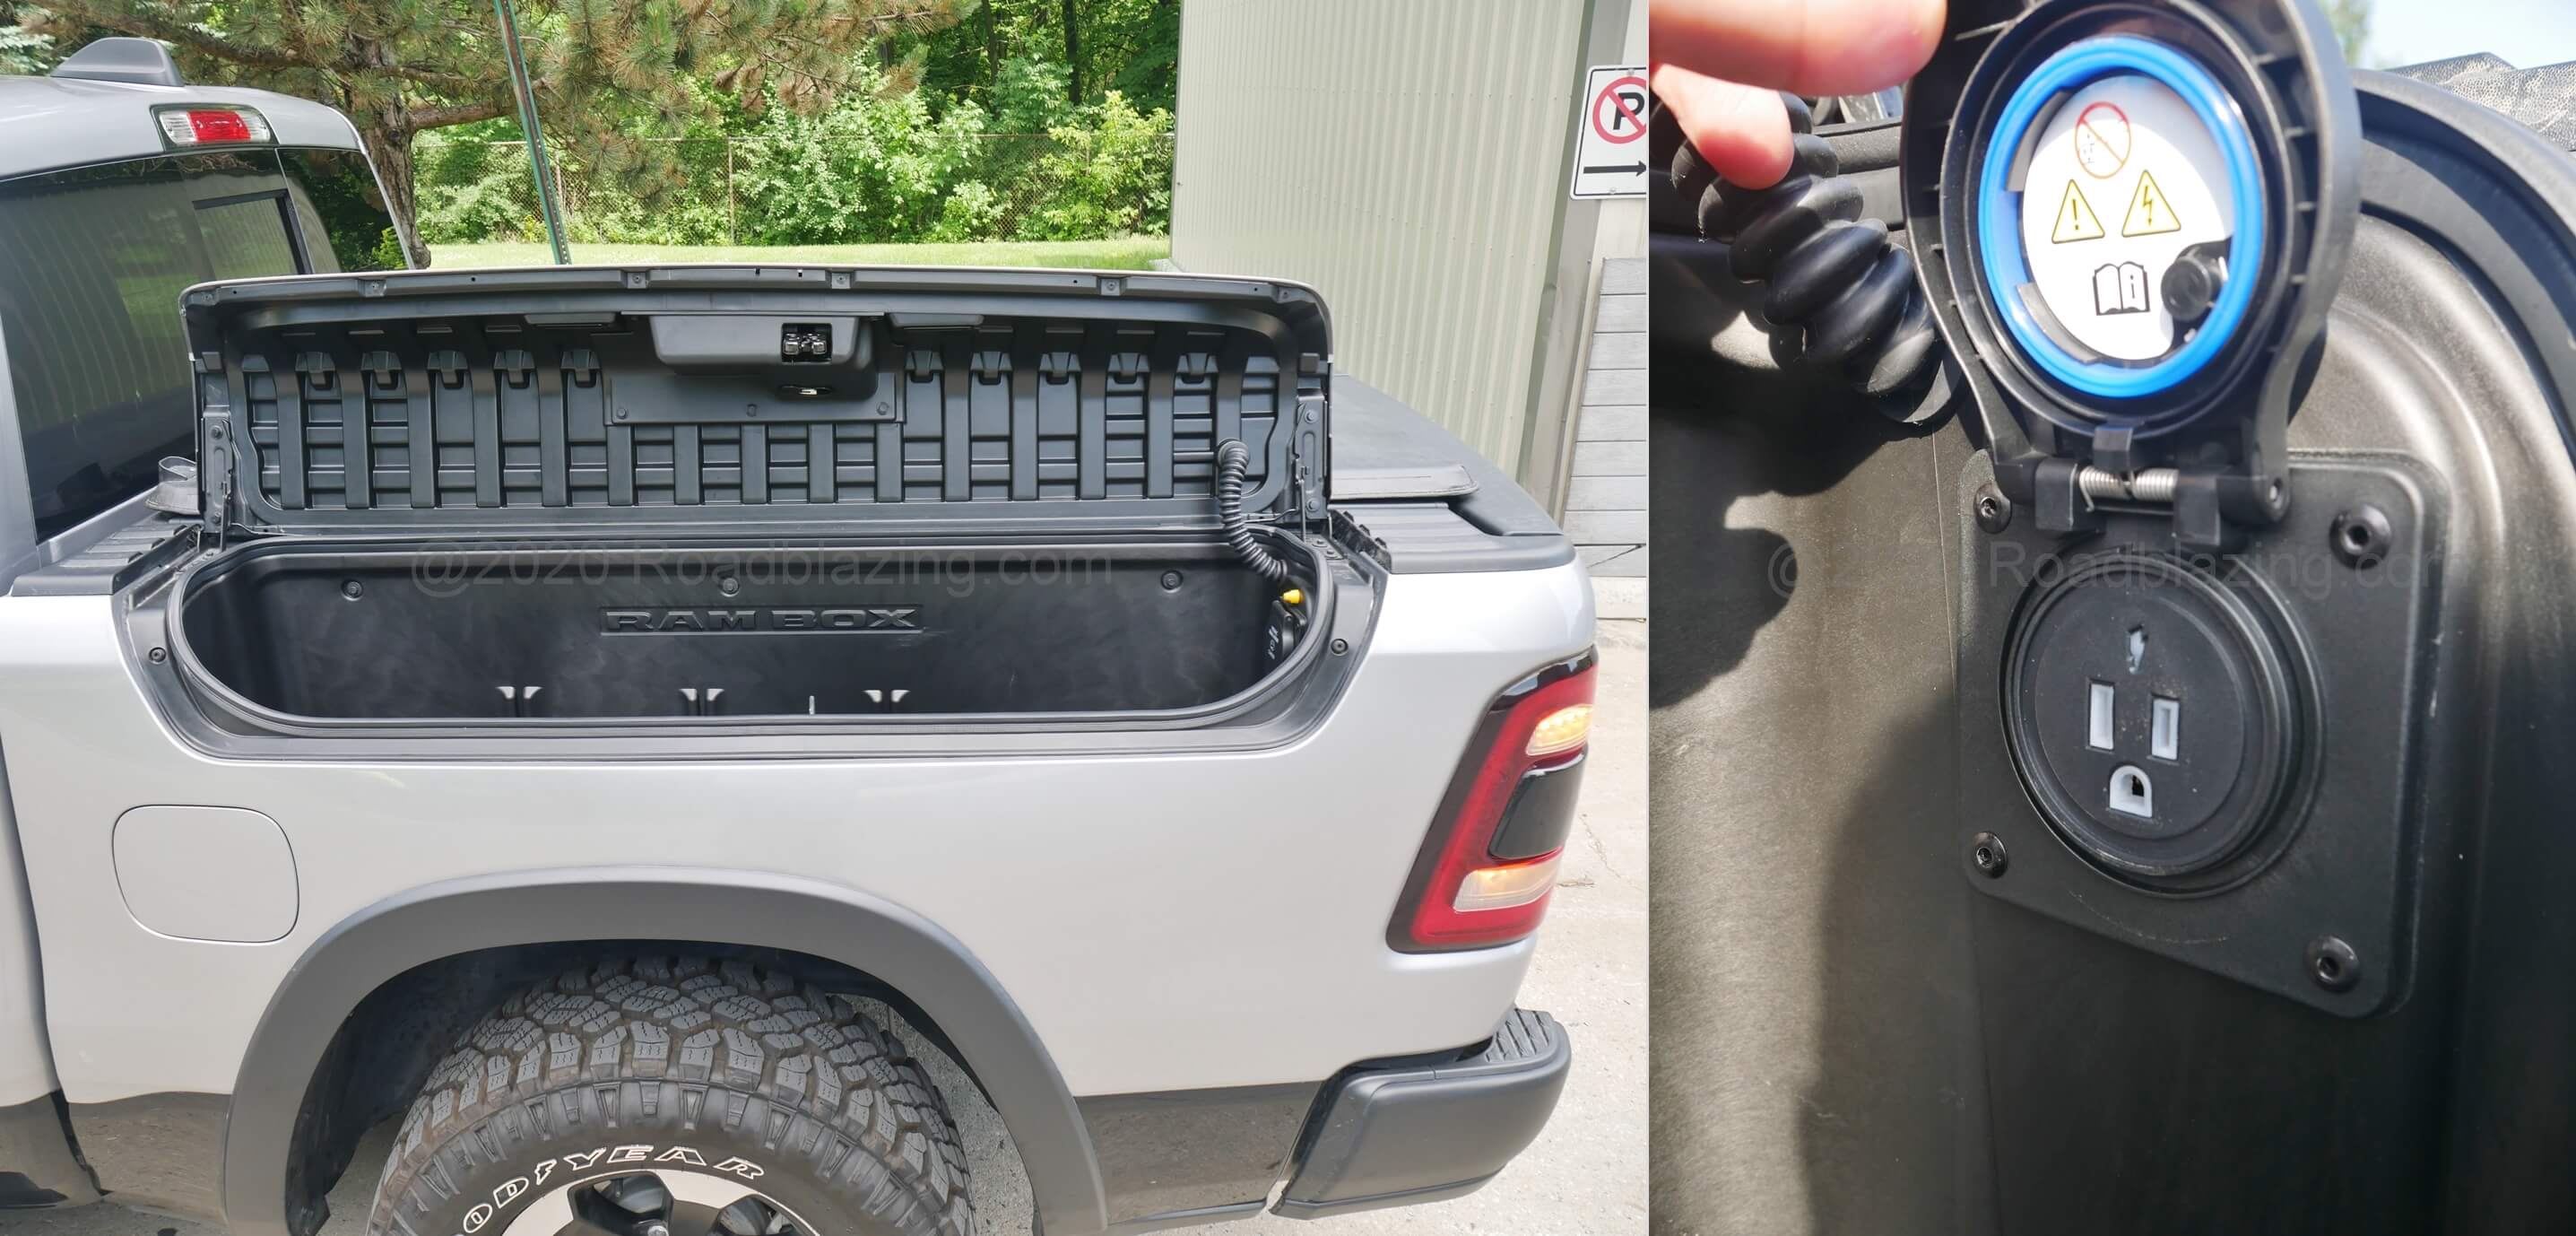 2020 RAM 1500 Rebel Crew 4x4 TDi: RAMBox integrated bed side saddle storage w/ grounded 115V 400W power supply